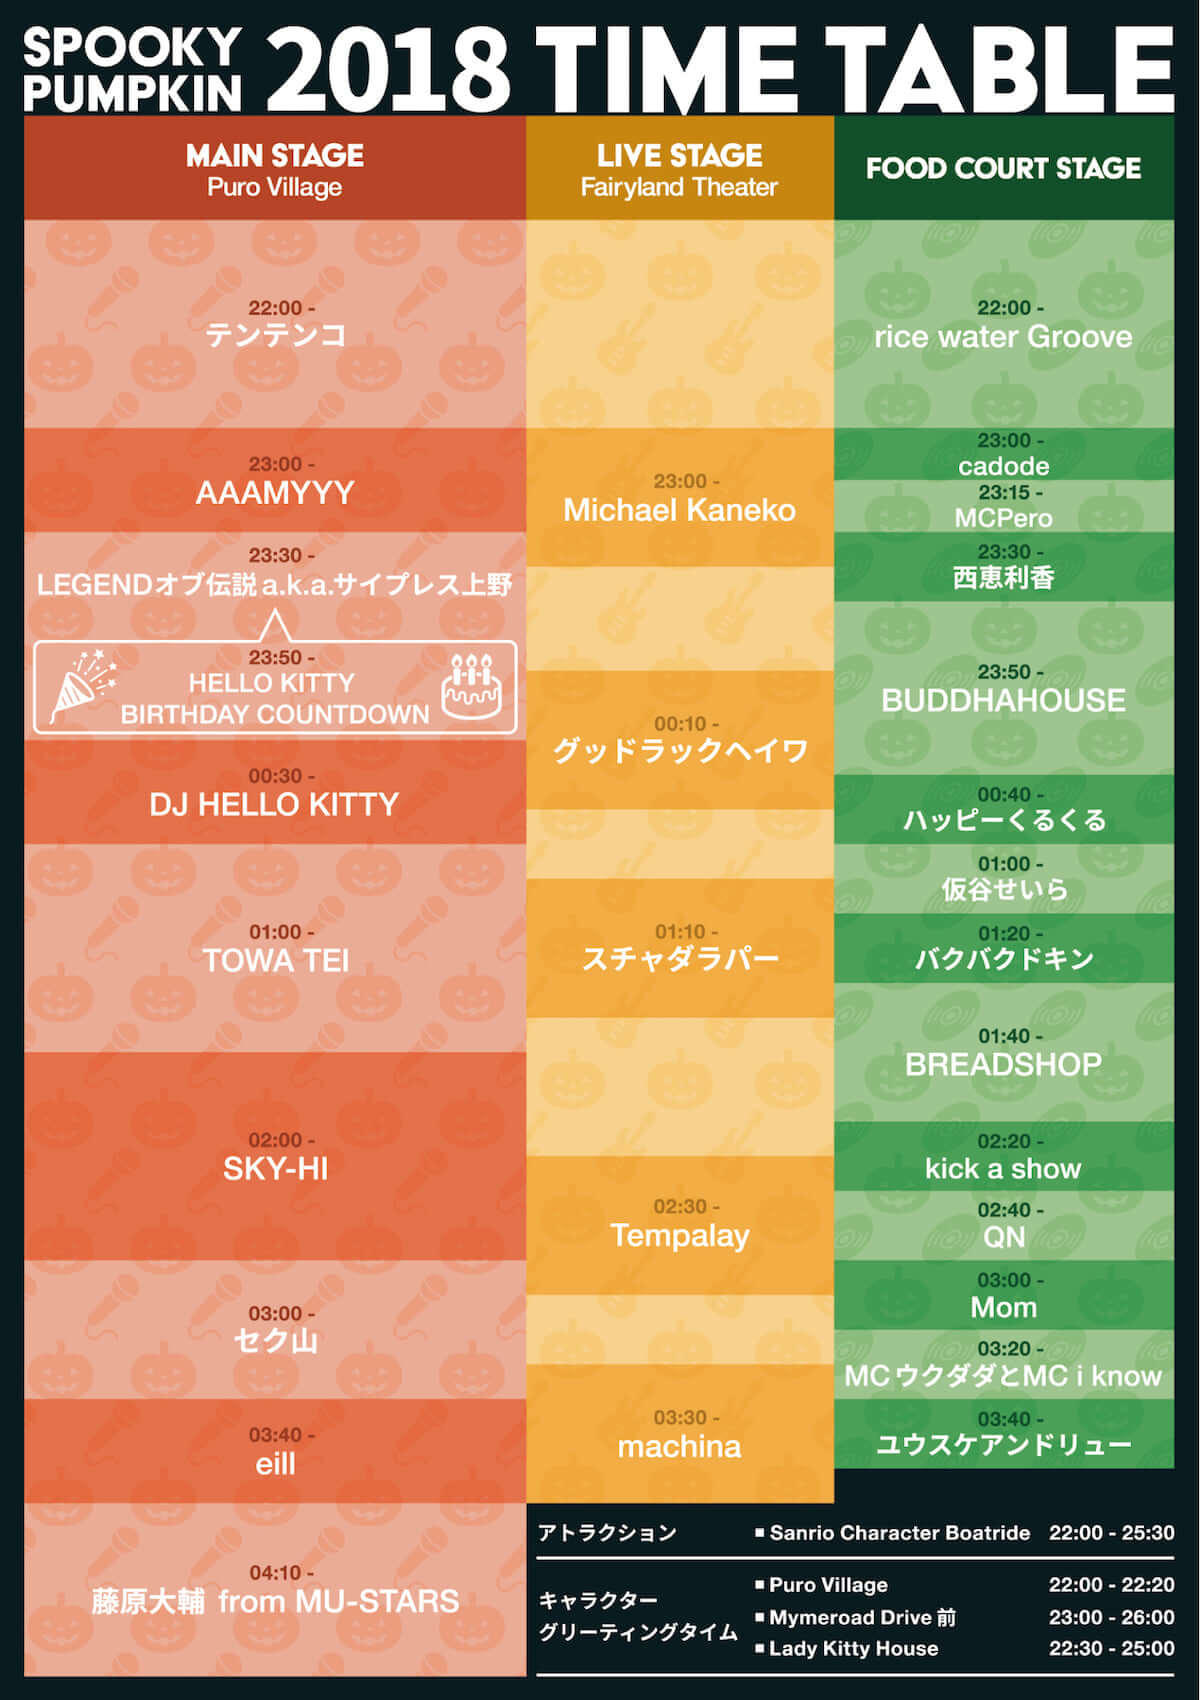 ＜SPOOKYPUMPKIN 2018 〜PURO ALL NIGHT HALLOWEEN PARTY〜＞タイムテーブル発表！SKY-HIとハローキティの夢の共演も決定 timetable_preview-1200x1700